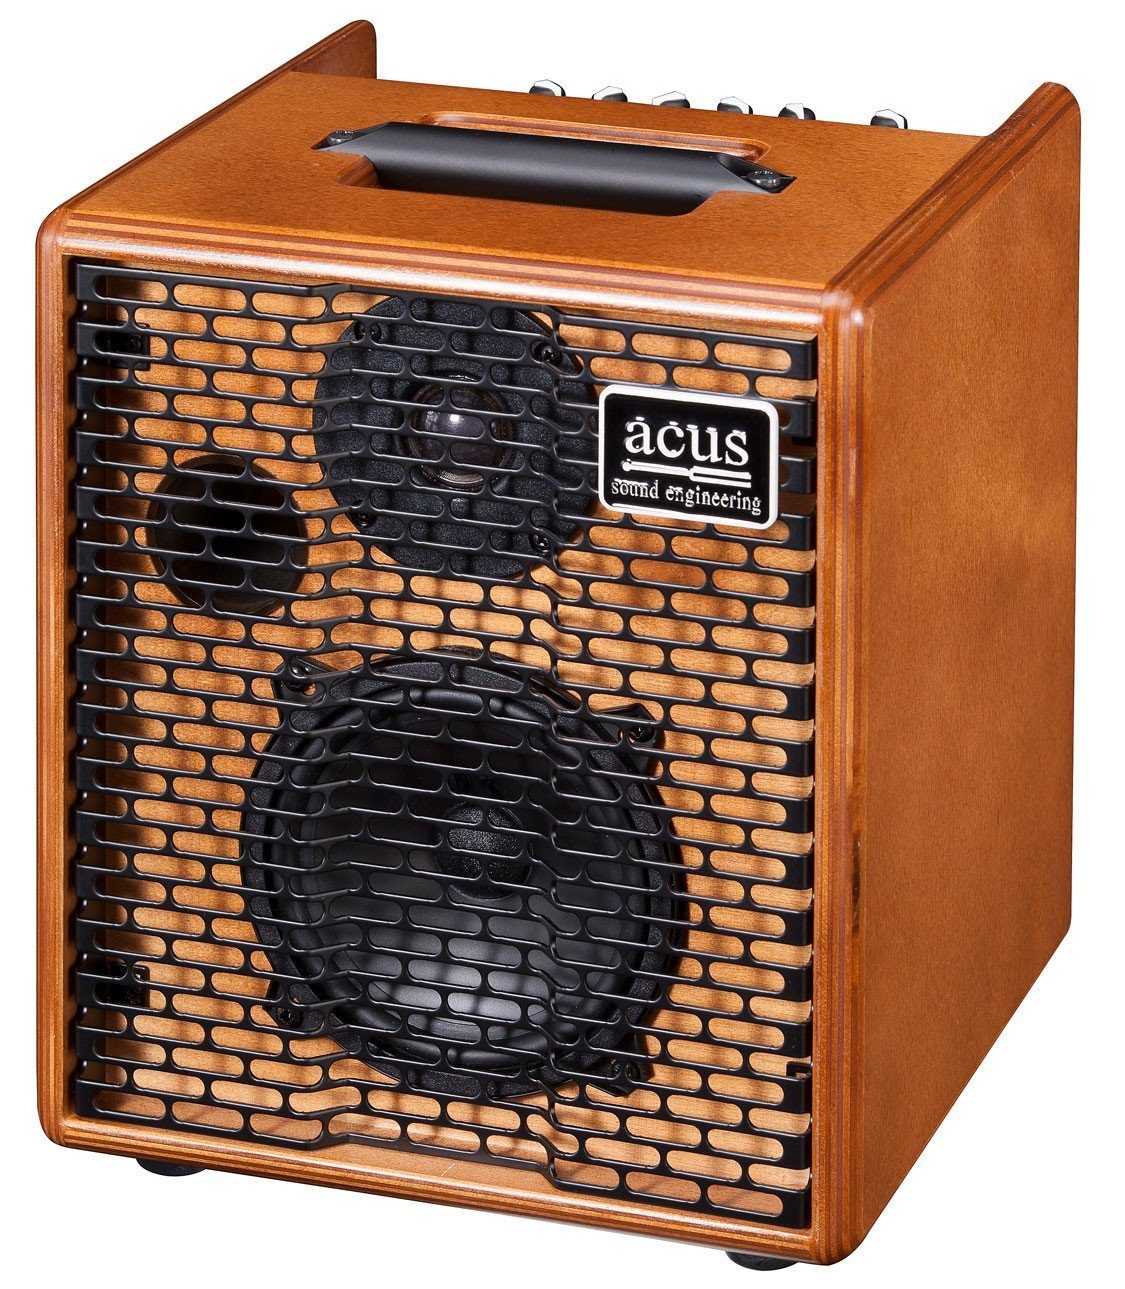 Acus ONE 5 WOOD, Amplification for sale at Richards Guitars.